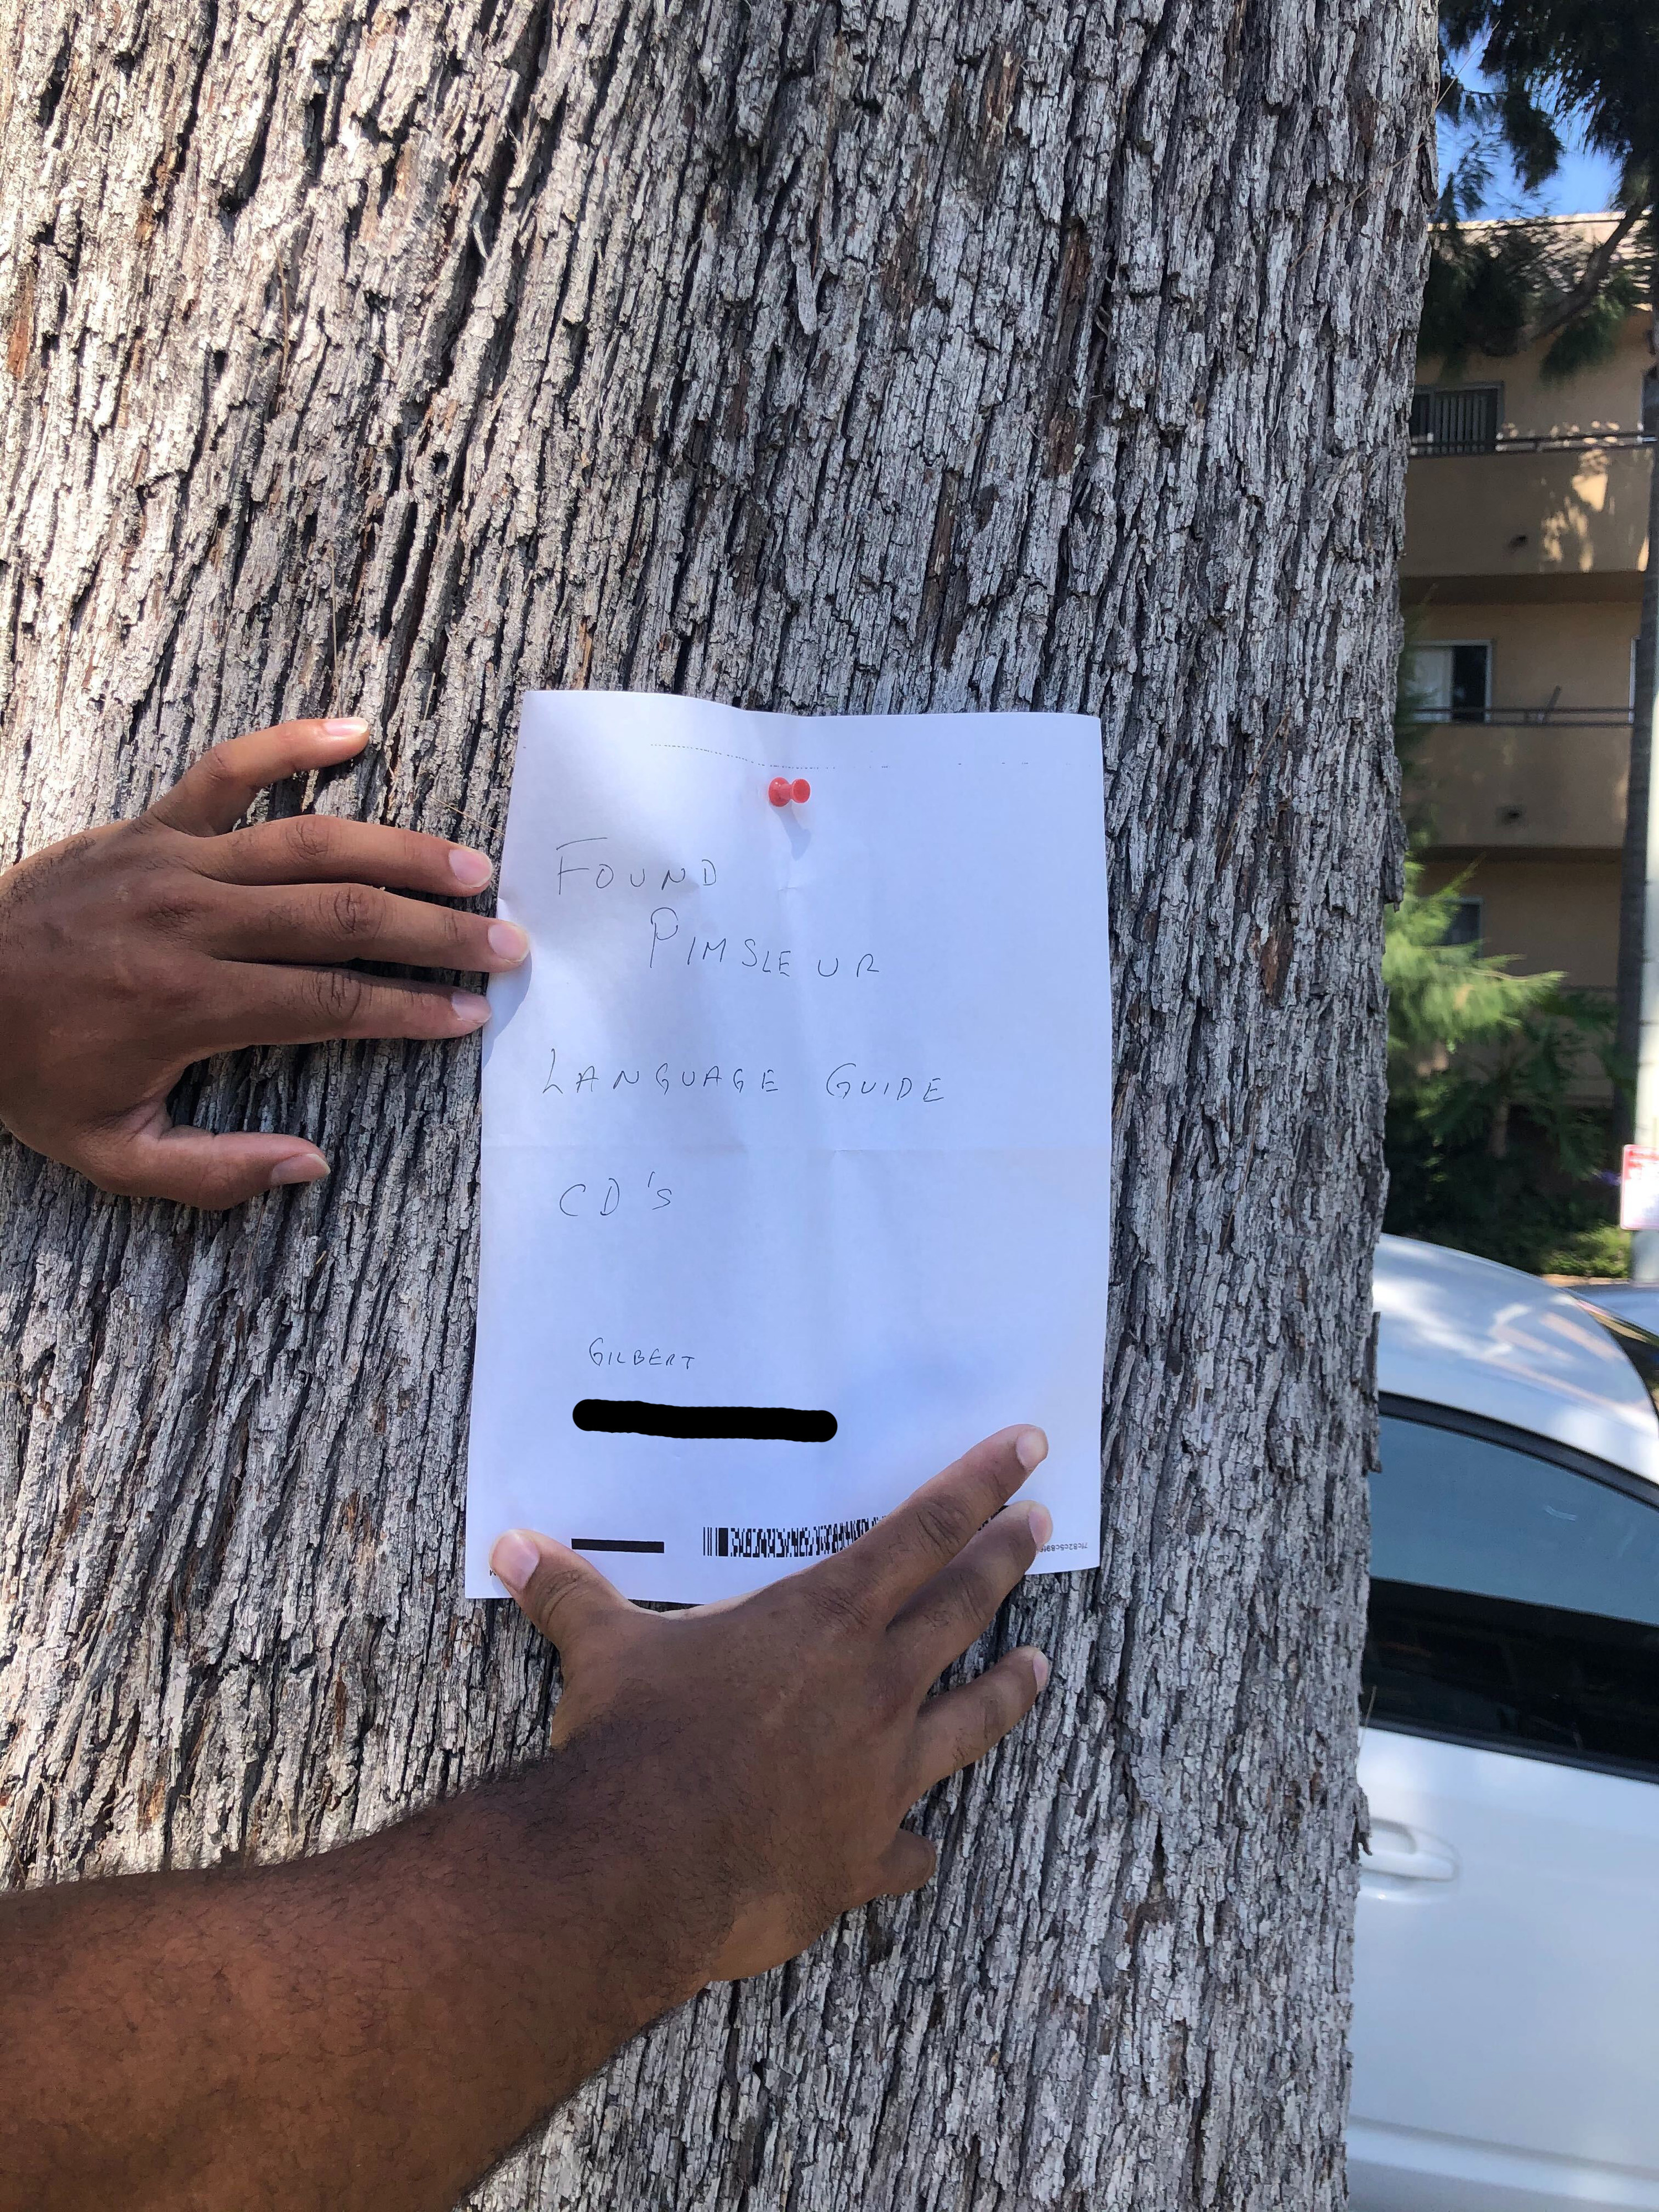 A piece of paper pinned to a tree that says &quot;Found pimsleur language guide CD&#x27;s.&quot; 